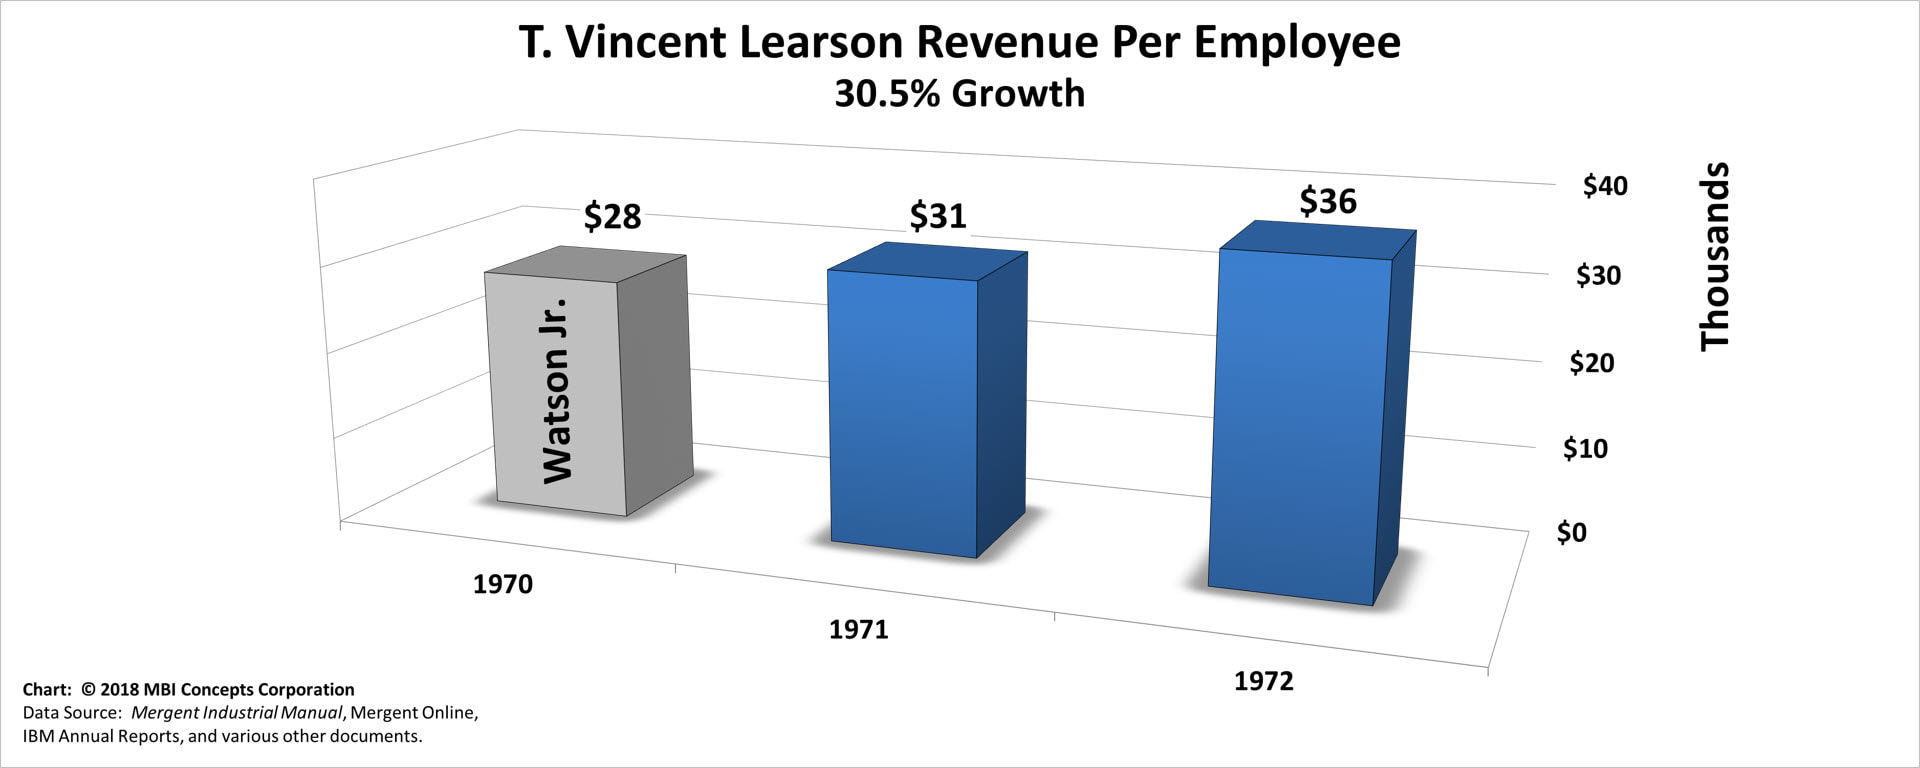 A color bar chart showing IBM's yearly revenue revenue per employee (sales productivity) from 1970 through 1972 for T. Vincent (Vin) Learson.